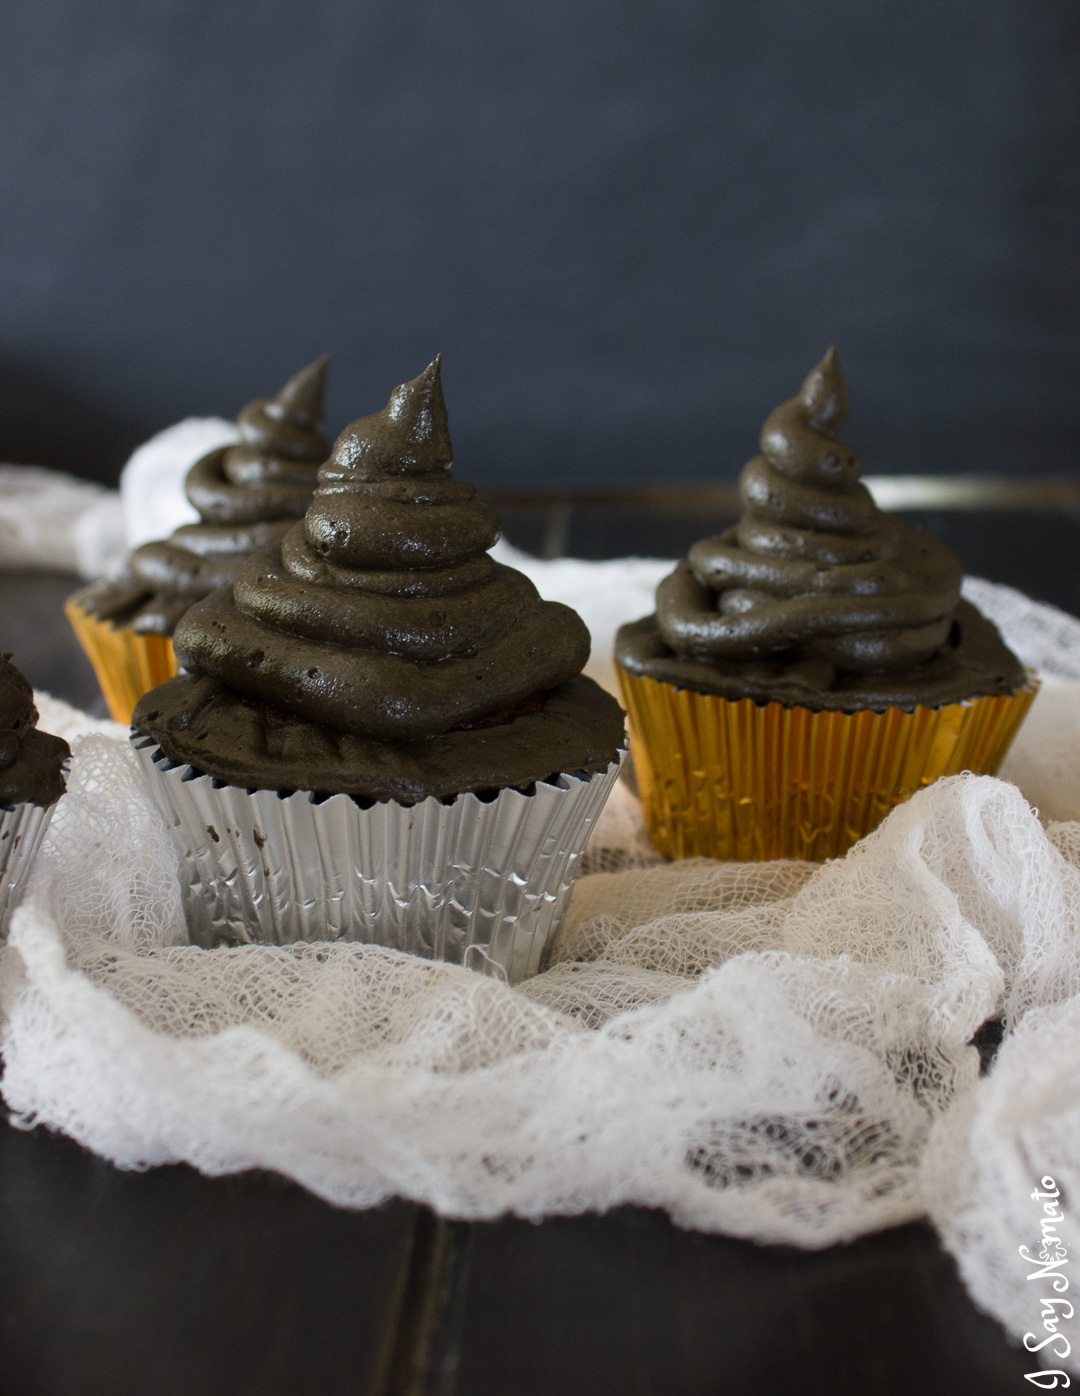 Harry Potter Inspired Sorting Hat Cupcakes - I Say Nomato